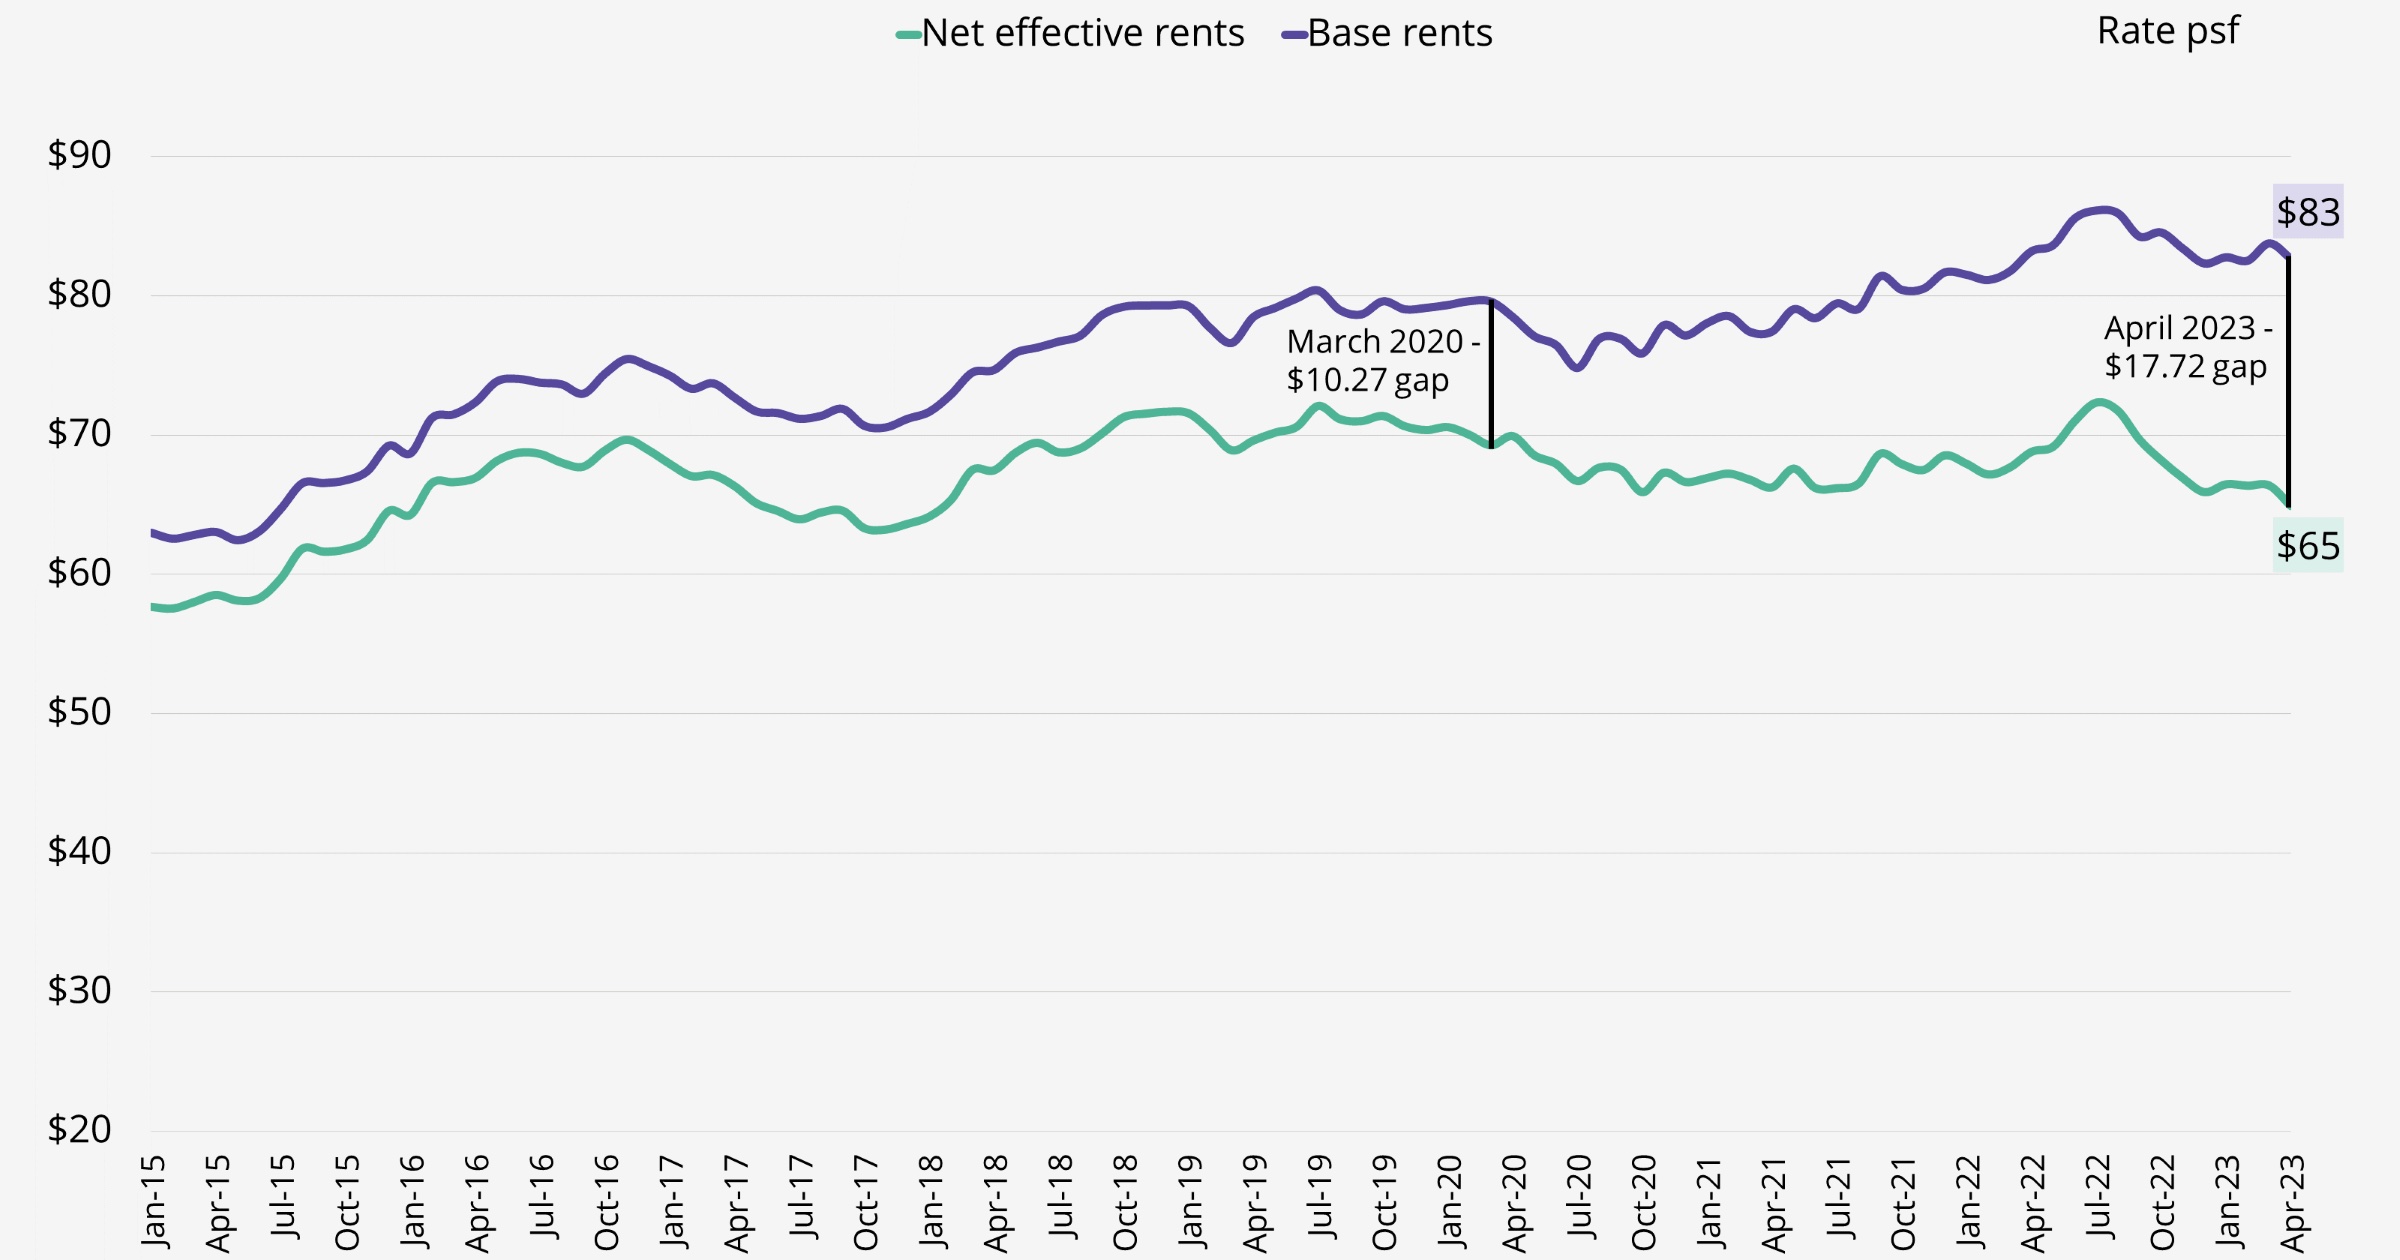 The gap between Class A base and net effective rents has reached $17.72 psf.